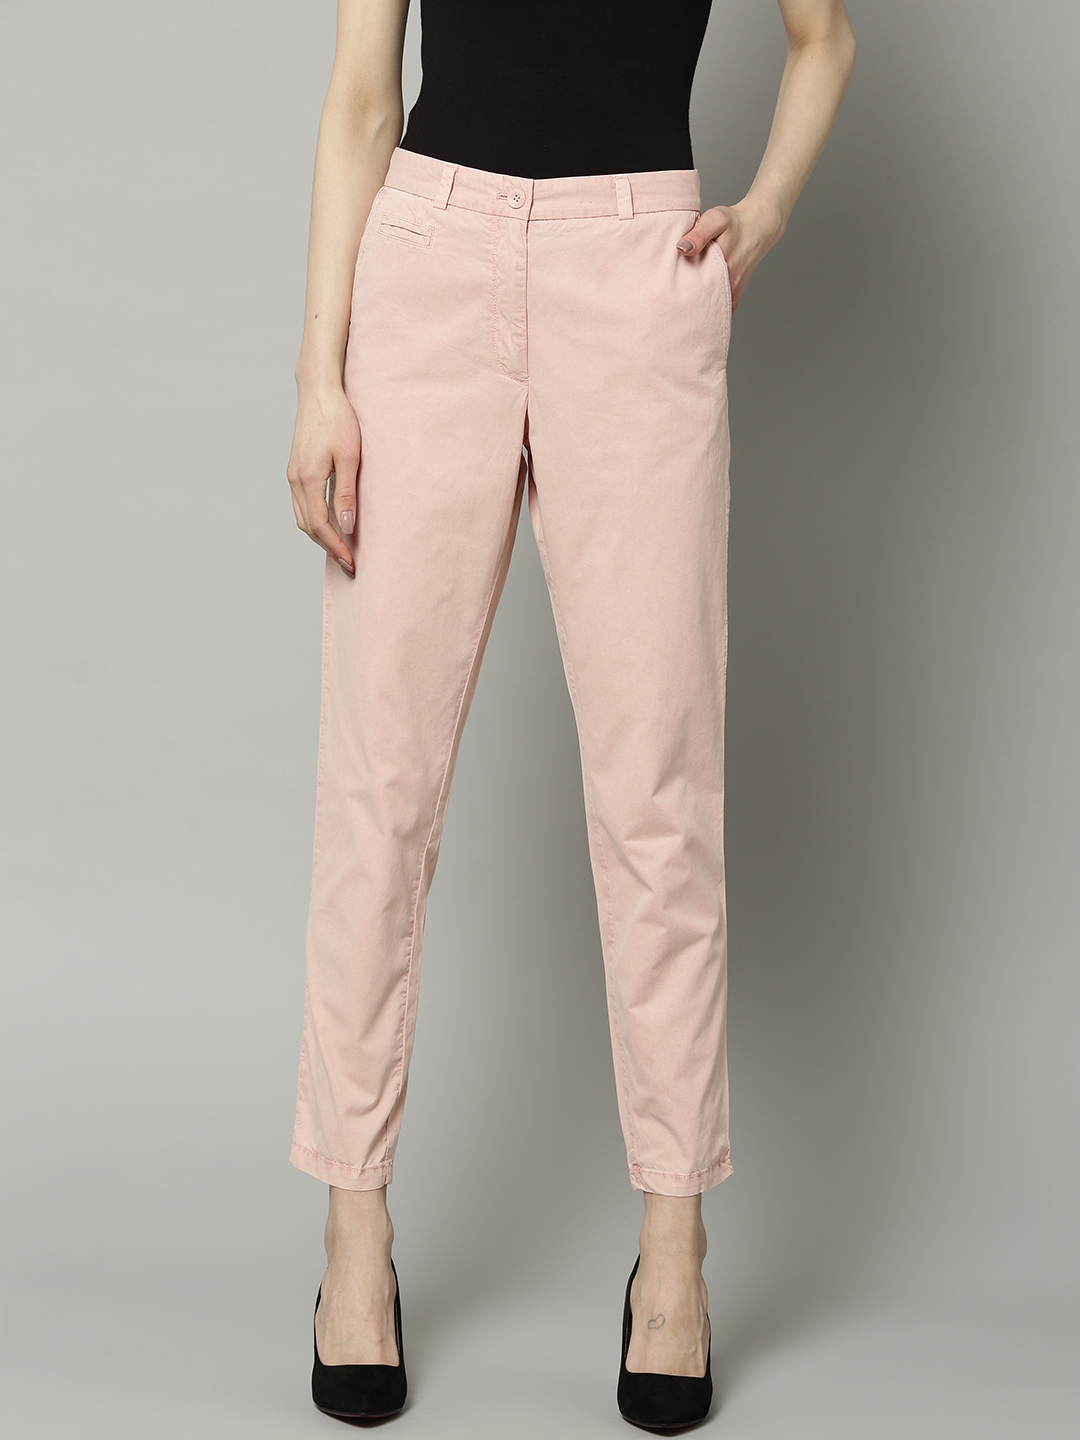 Marks  Spencer Chinos outlet  Women  1800 products on sale   FASHIOLAcouk